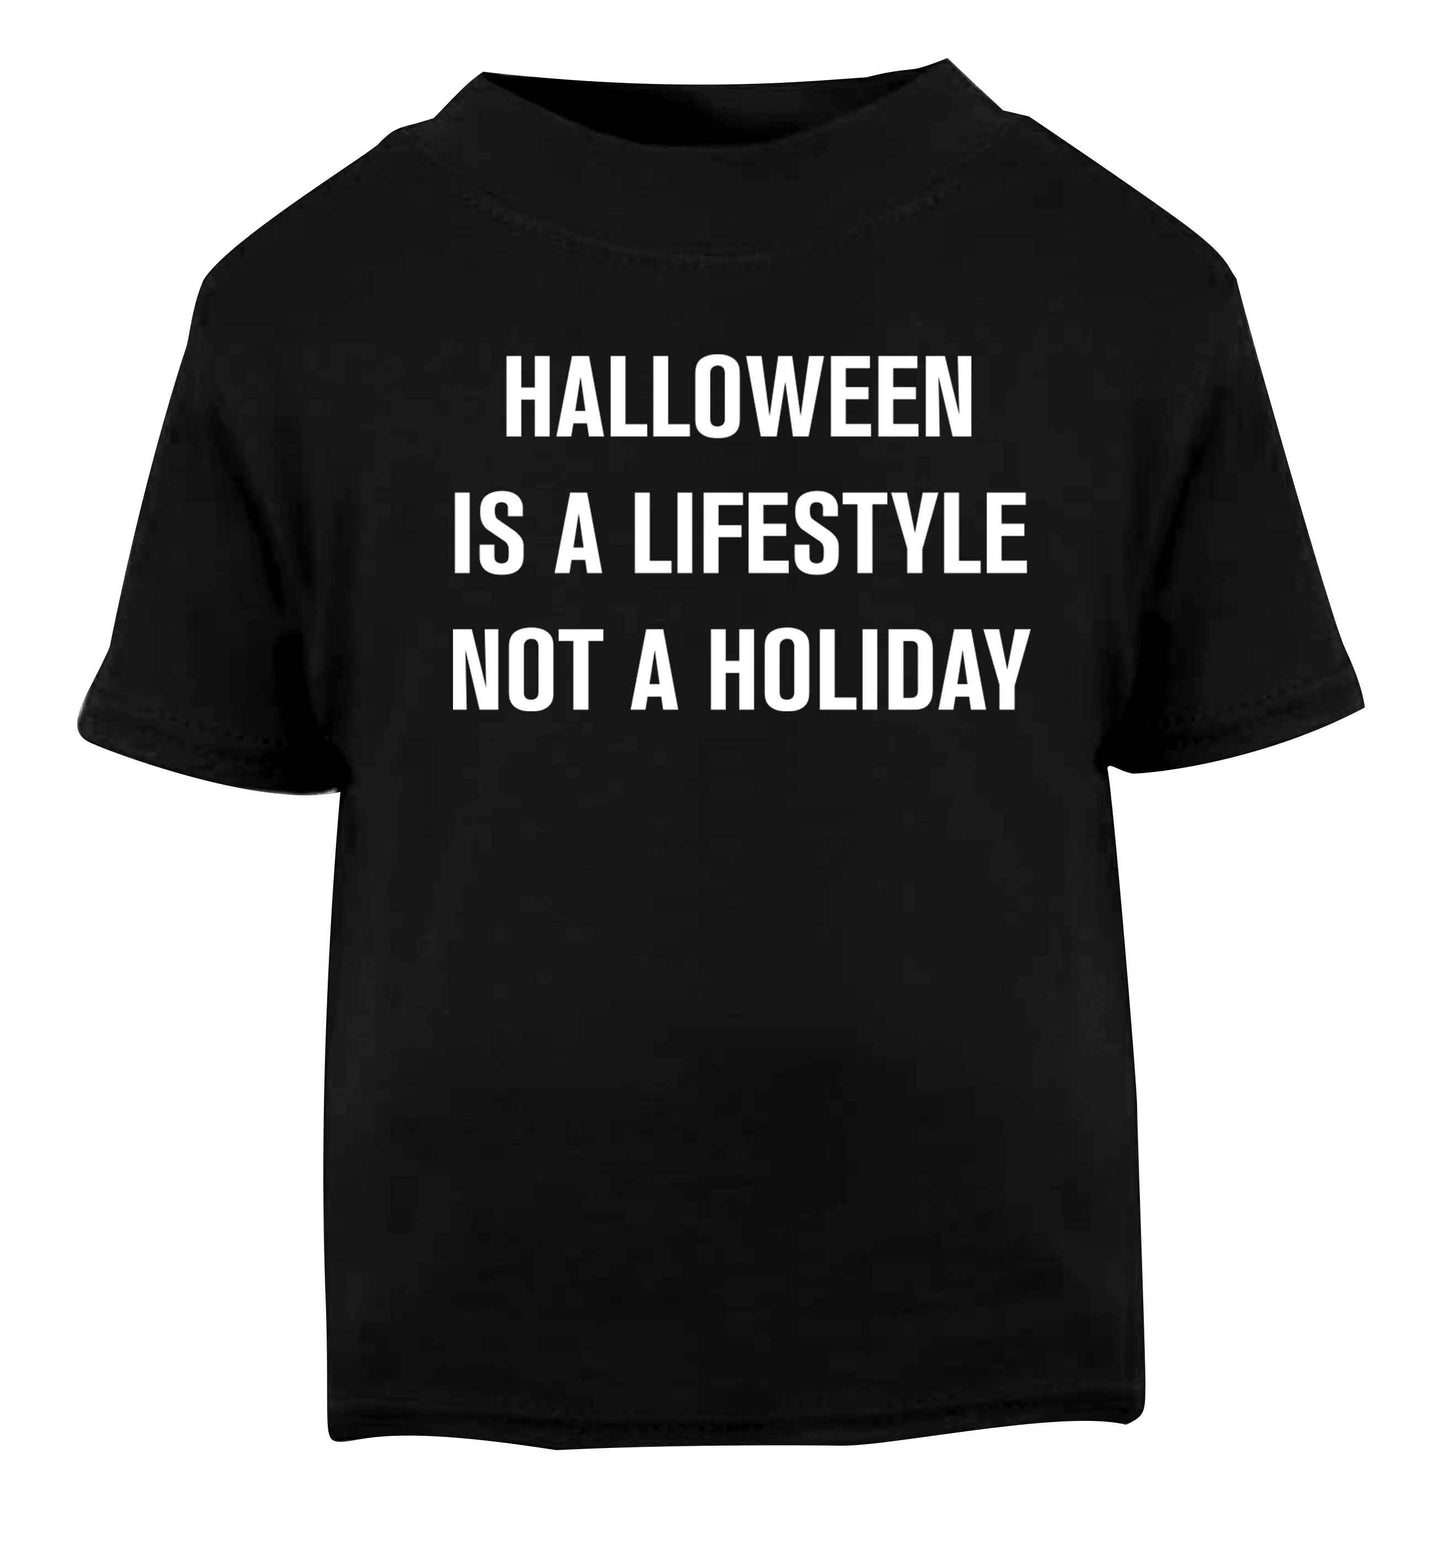 Halloween is a lifestyle not a holiday Black baby toddler Tshirt 2 years